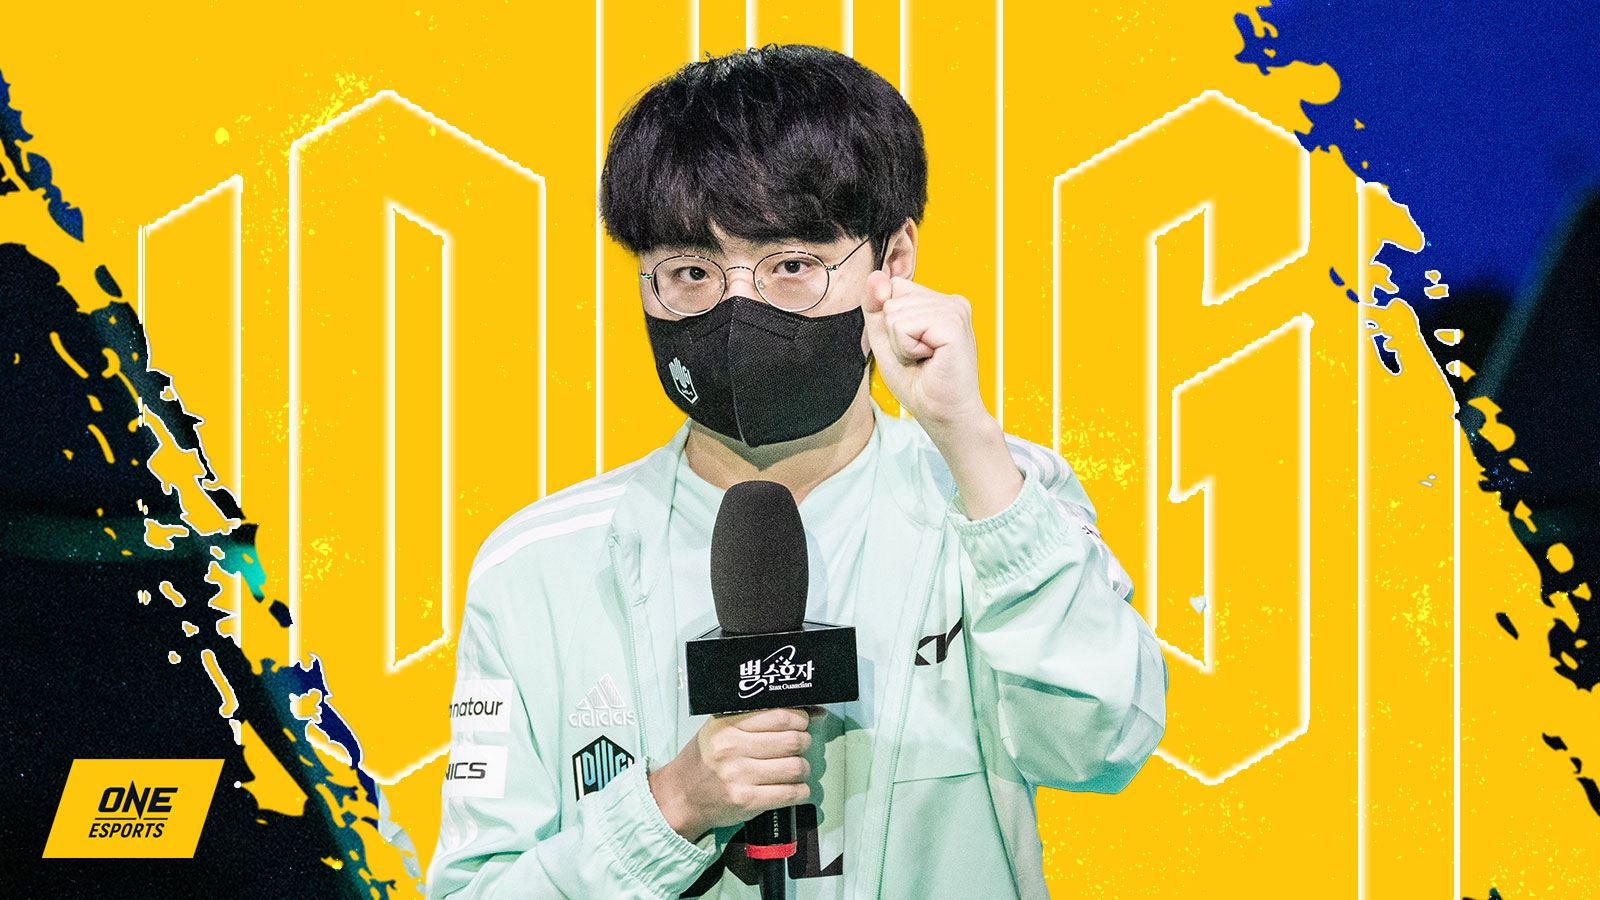 DK ShowMaker: I feel that the LCK mid laners are much better than